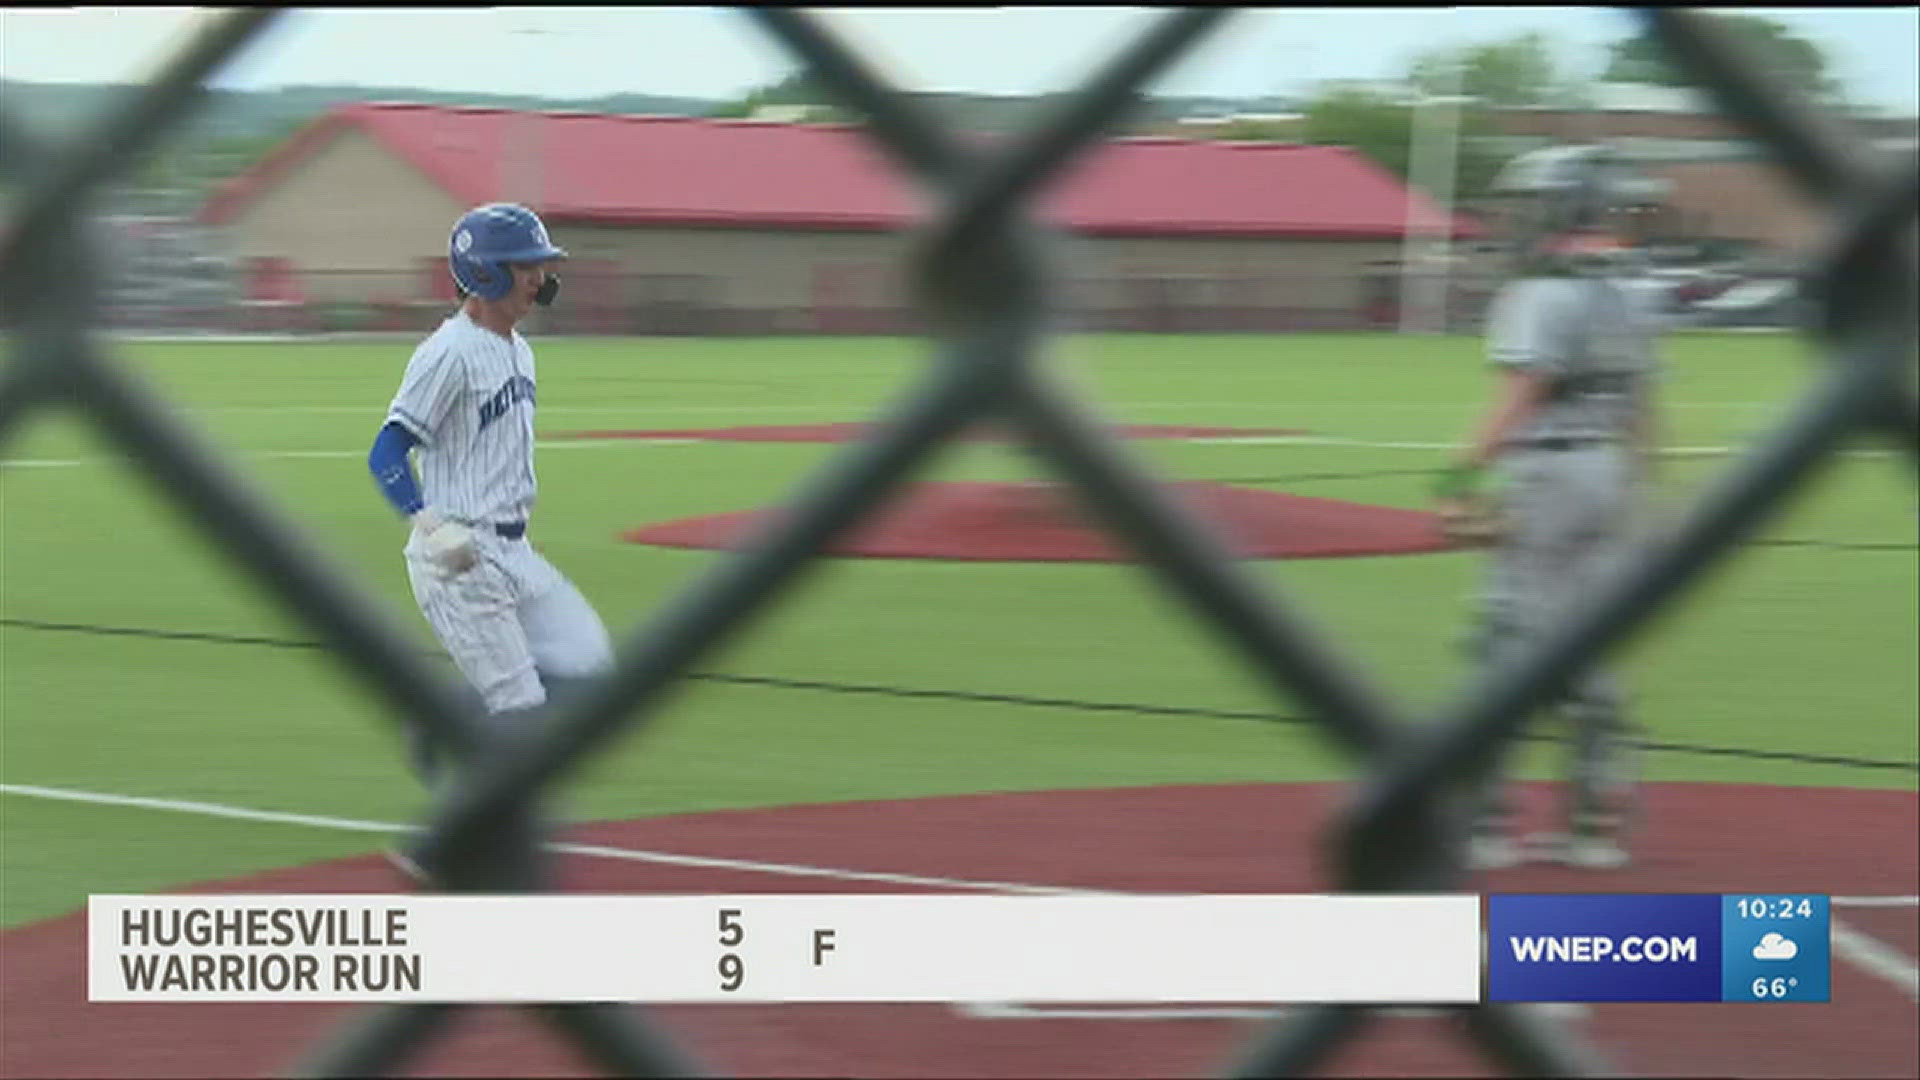 Game played on the turf at Bloomsburg High-School